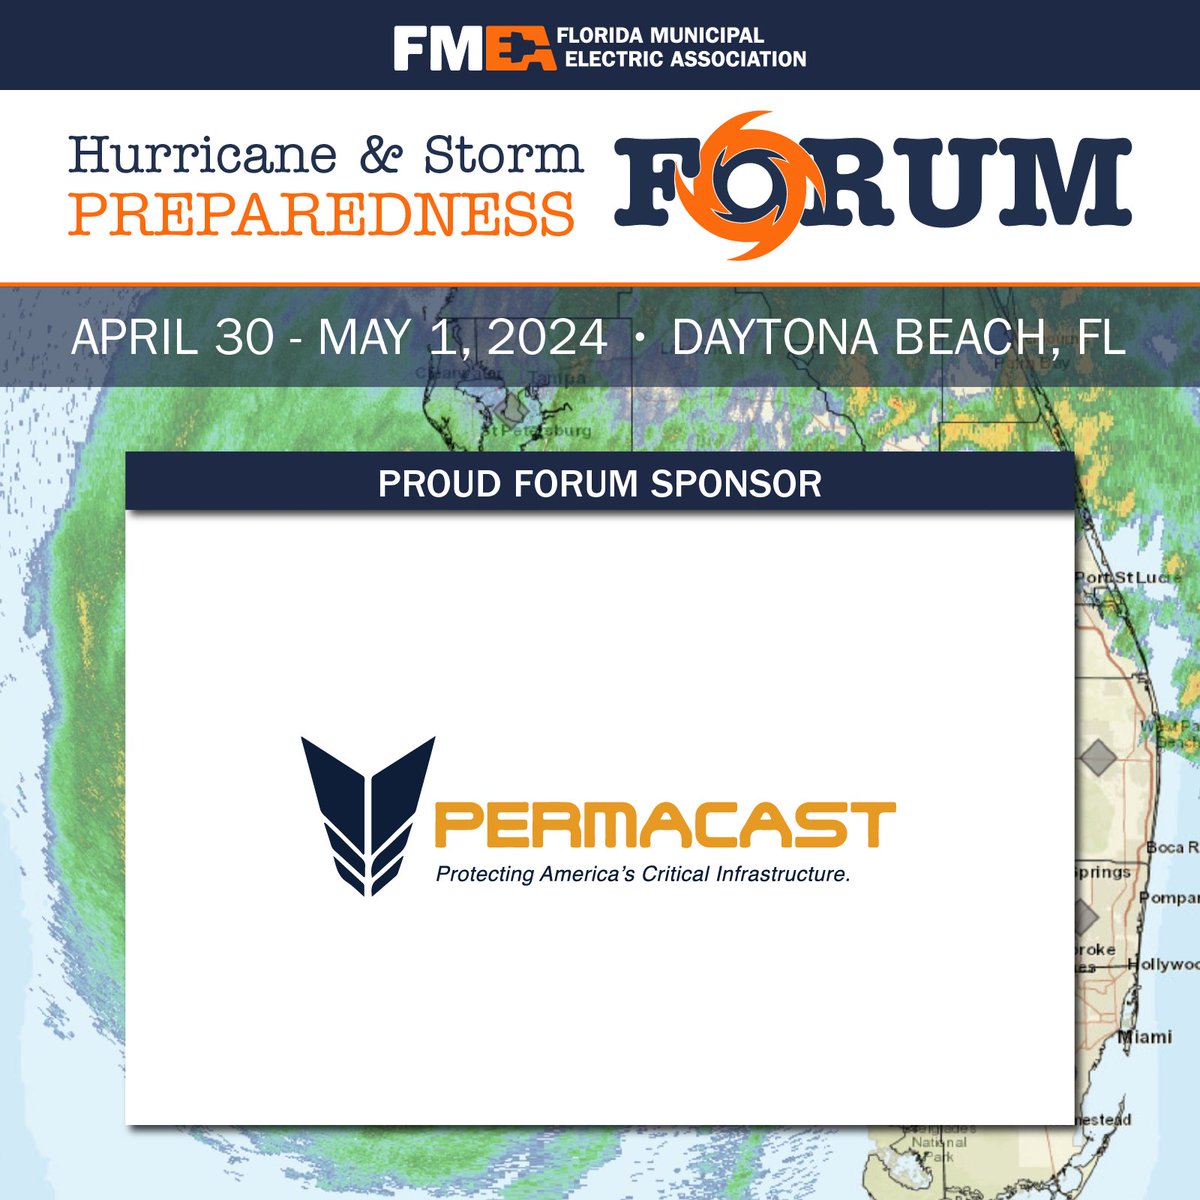 Permacast Walls will be exhibiting at the @flpublicpower 2024 Hurricane & Storm Preparedness Forum.

🗓️ April 30 - May 1, 2024
📍 Daytona Beach, FL
🔗flpublicpower.com/events/hurrica…

Join us at The Shores Resort & Spa for this event hosted by the Florida Municipal Electric Association.